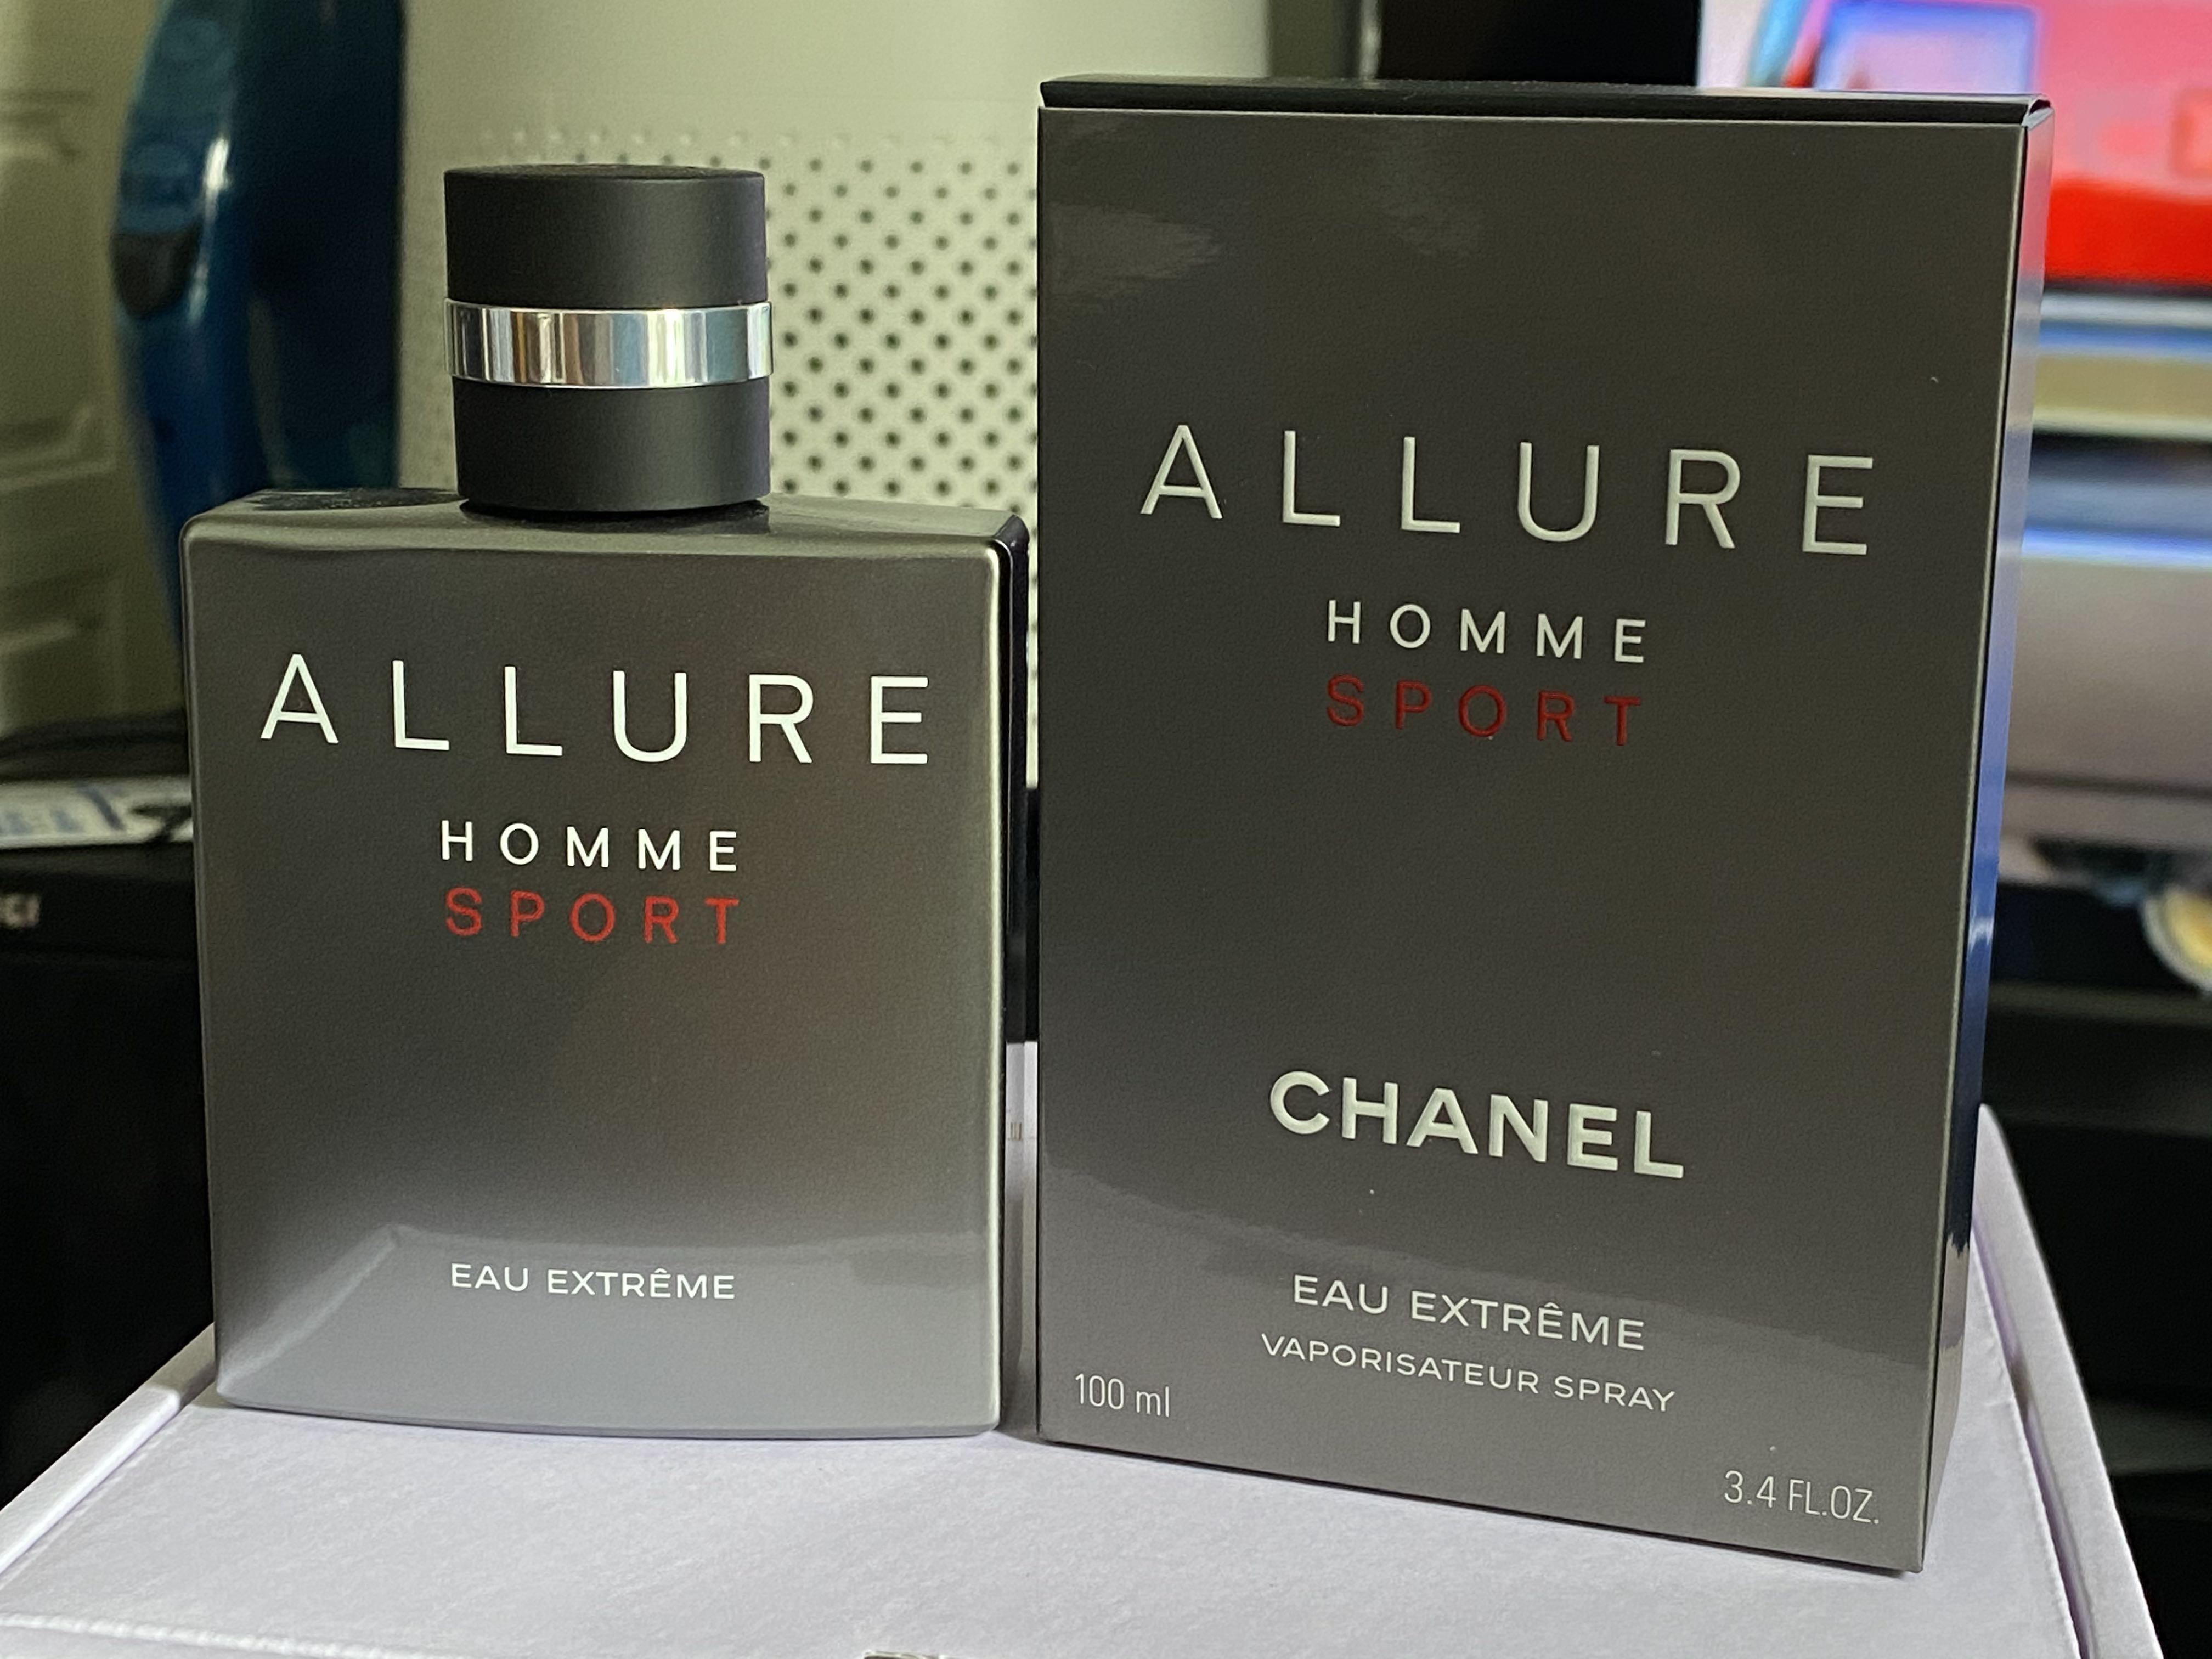 Духи allure homme. Chanel Allure homme Sport Eau extreme 100 ml. Chanel Allure homme Sport extreme. Chanel Allure homme Sport Eau extreme. Chanel Allure Sport Eau extreme.